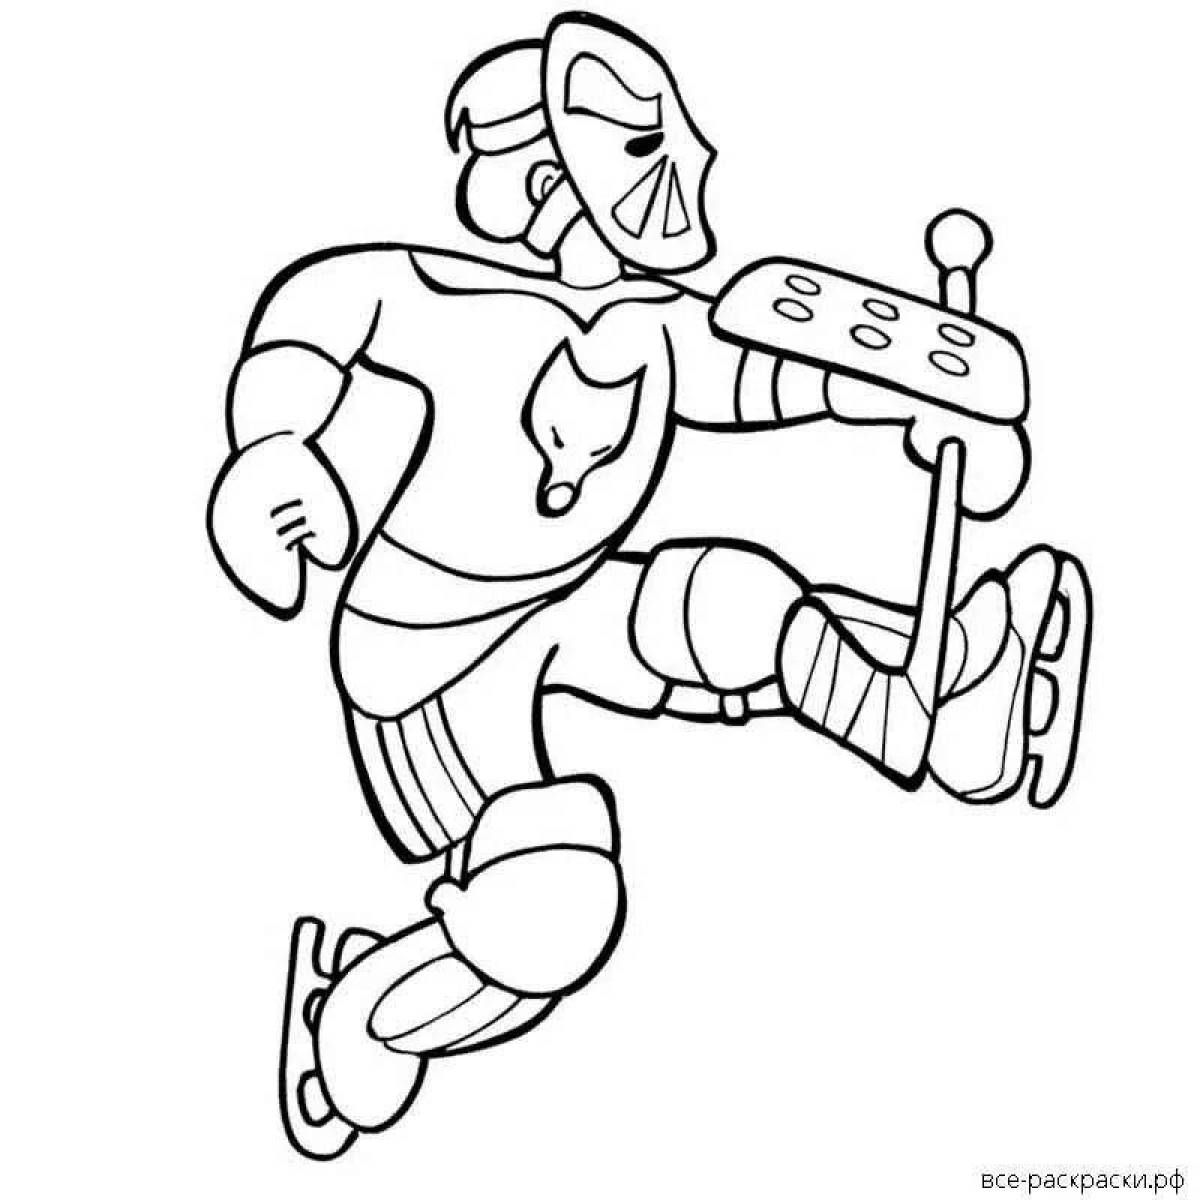 Great goalkeeper coloring page